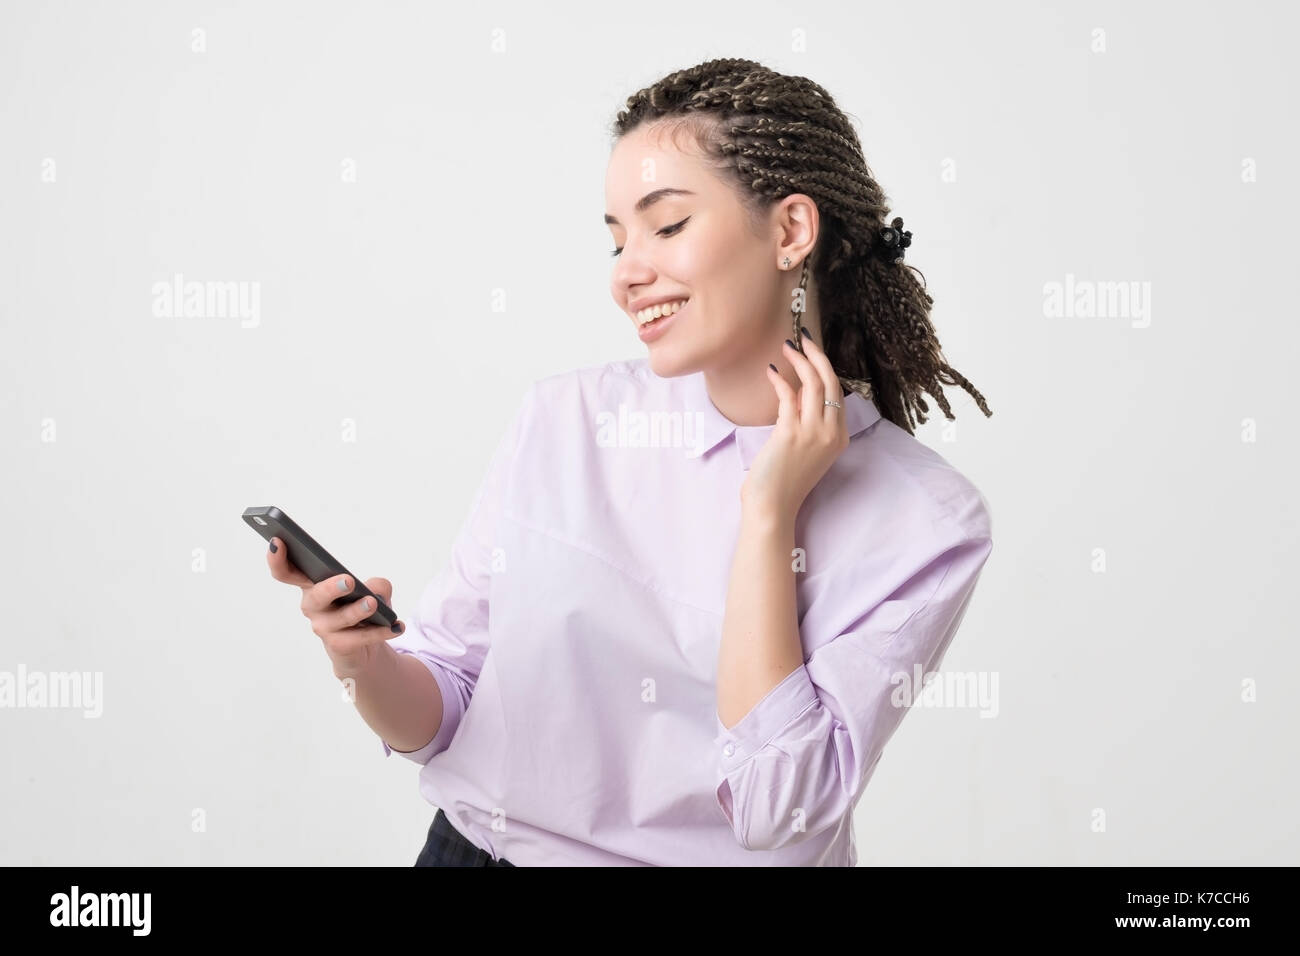 Caucasian woman spending free time using a smart phone. Stock Photo